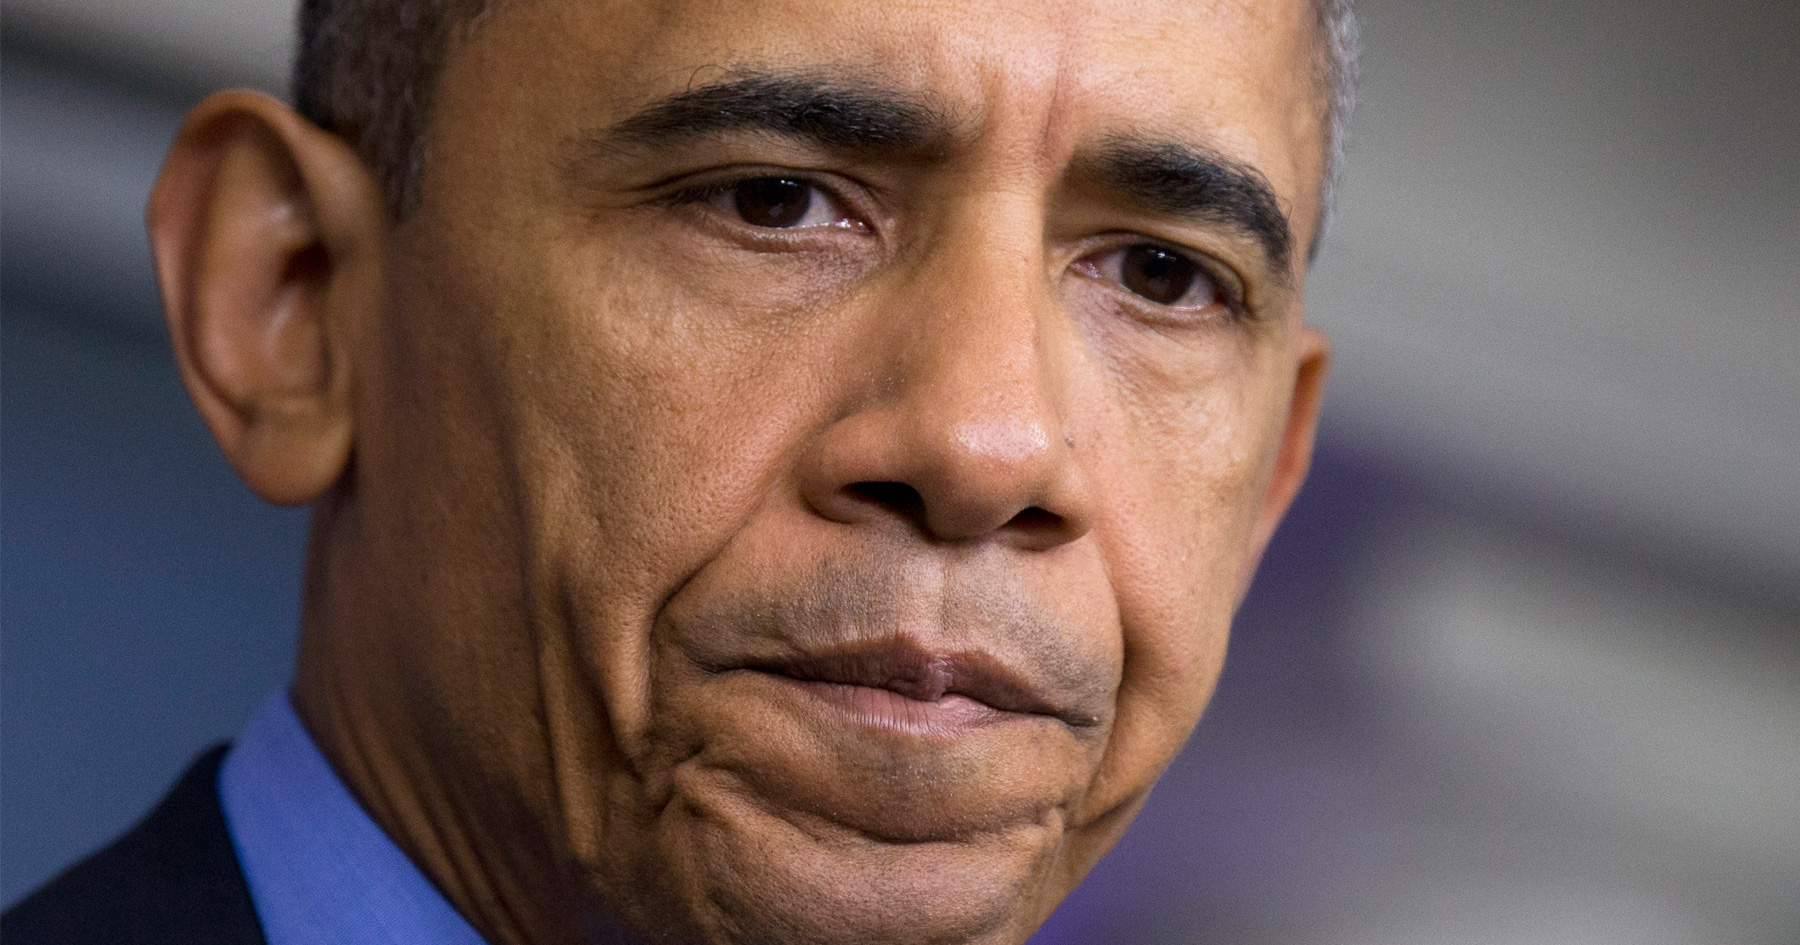 Barack Obama pauses during briefing about Charleston